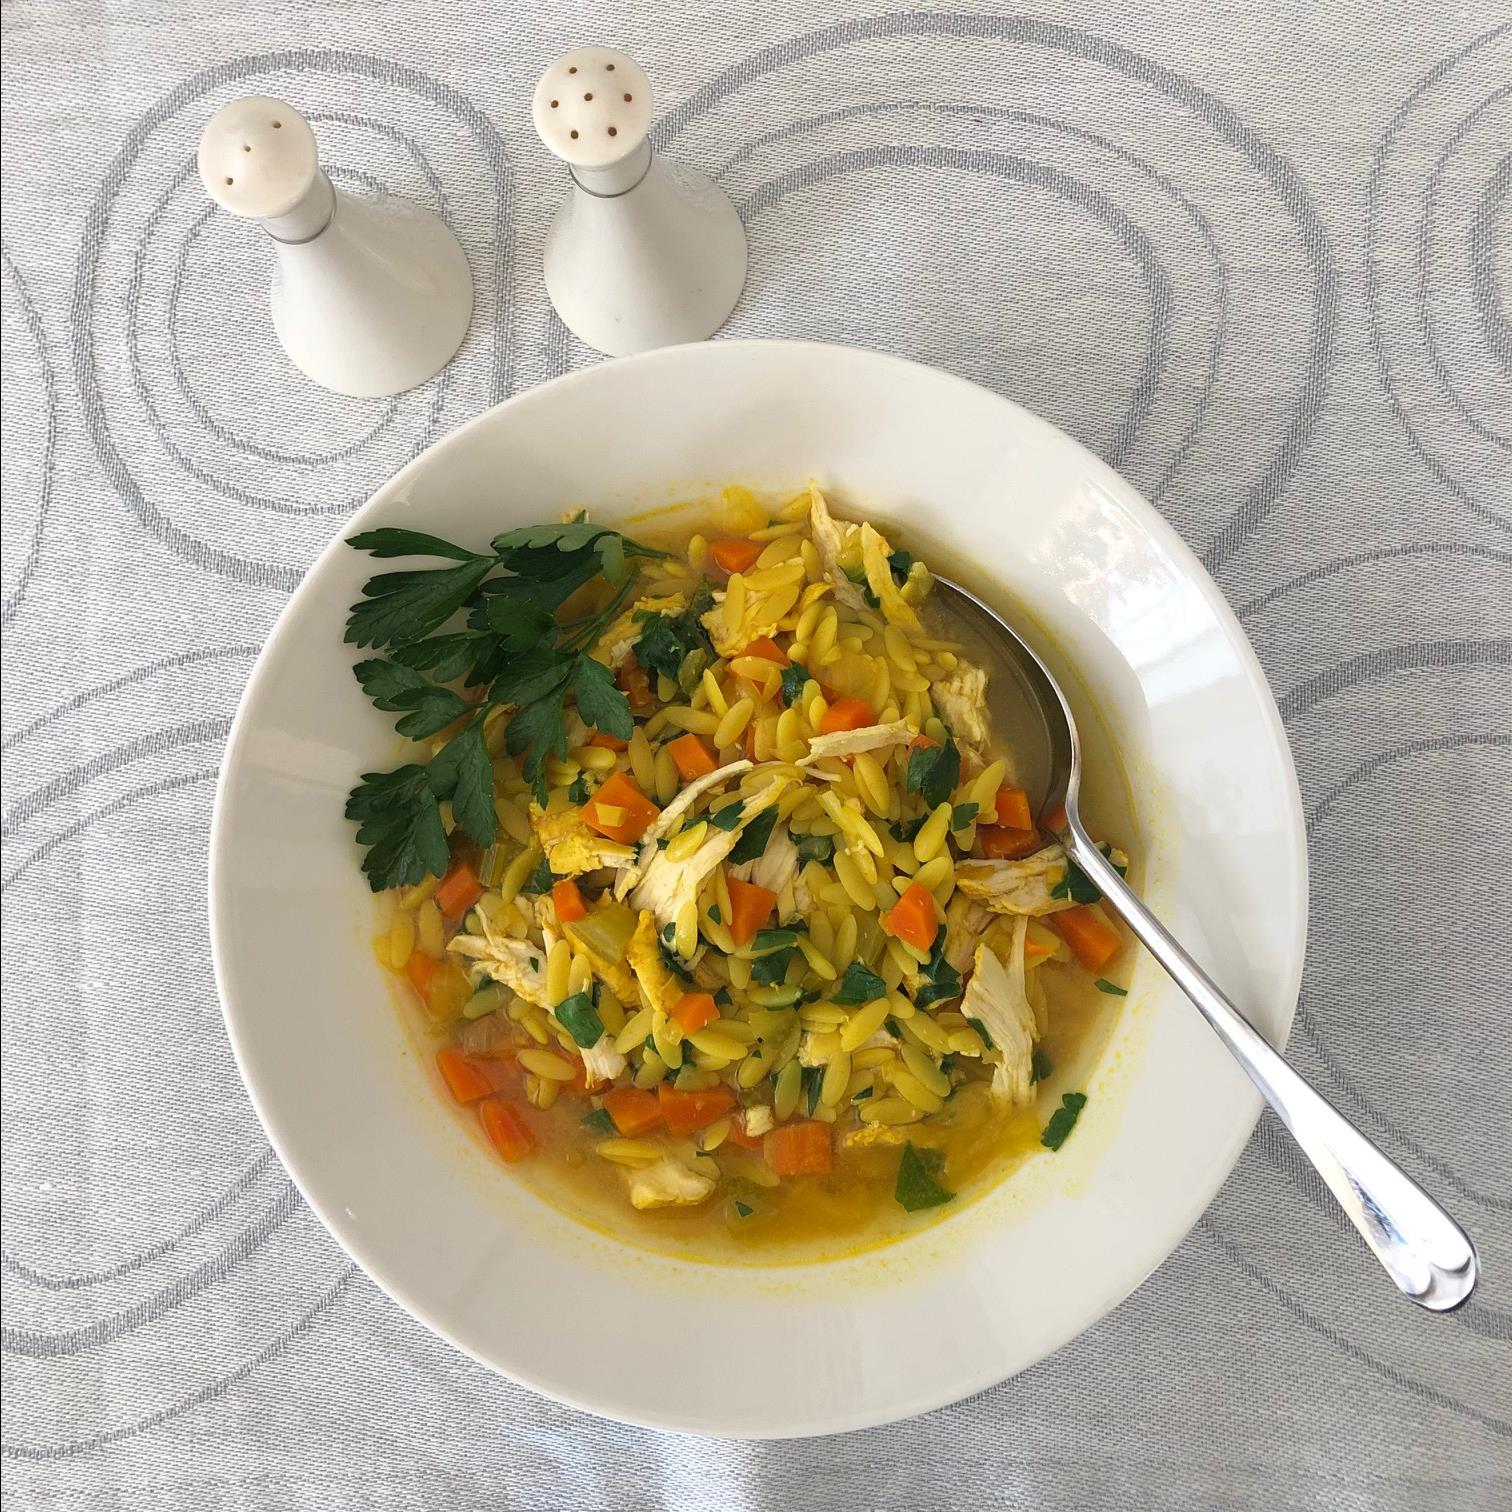 Chicken Soup  similar to Orzo and Turmeric